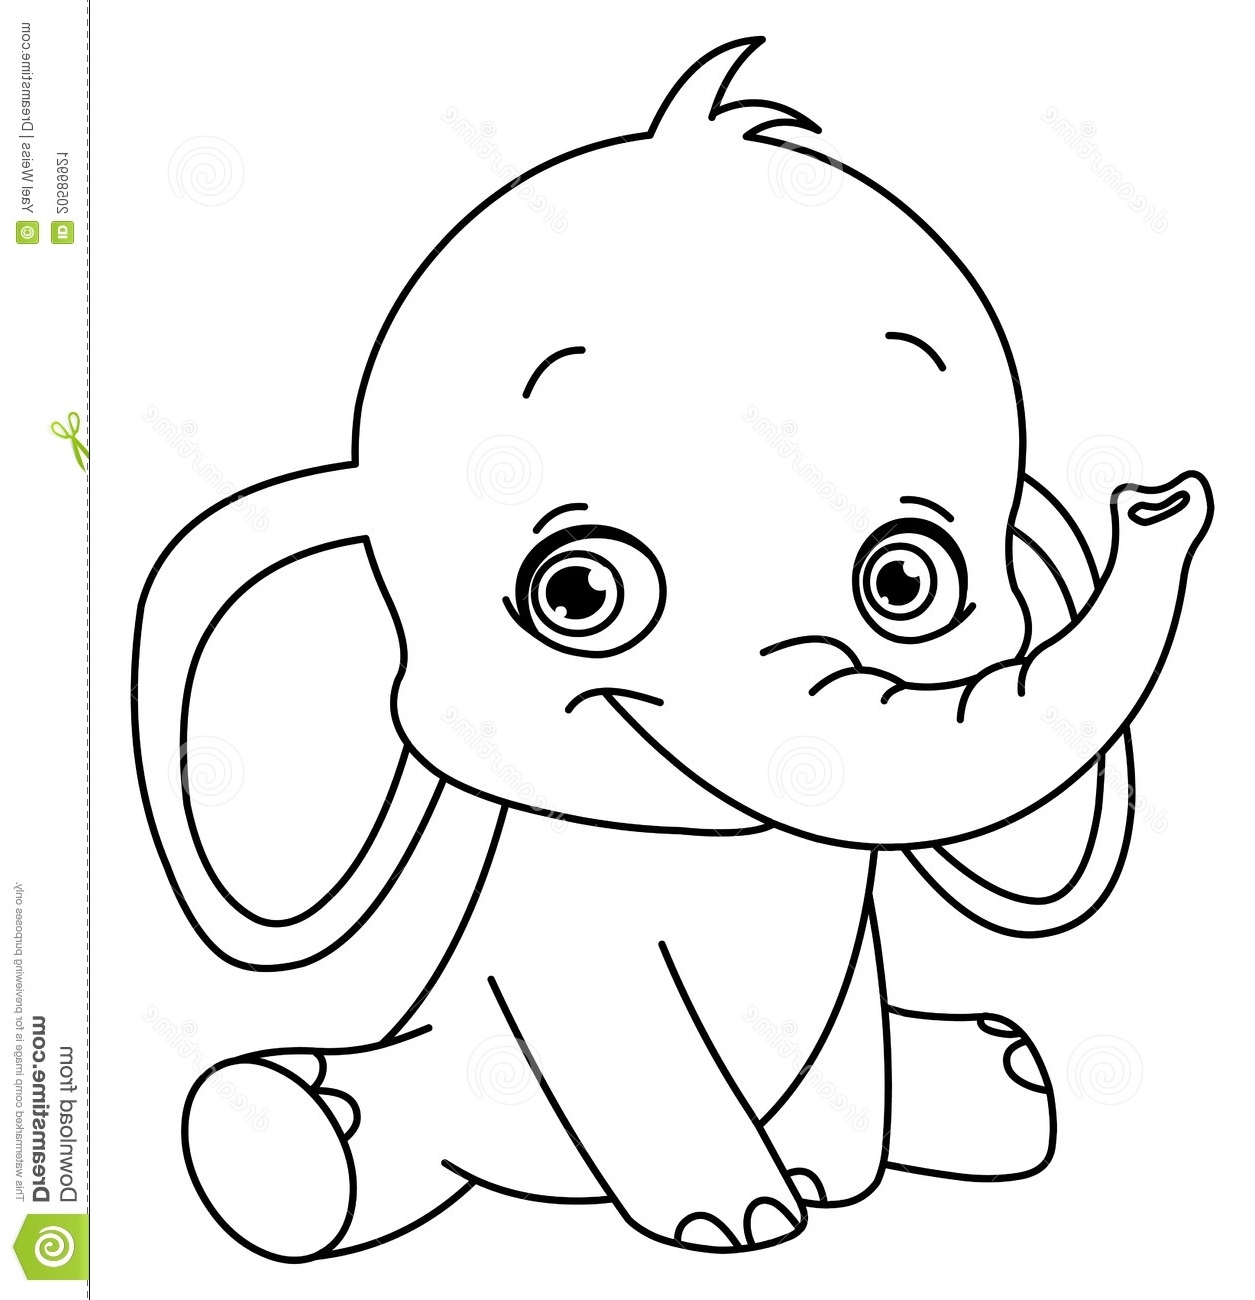 Elephant Coloring Pages at GetColorings.com | Free ...